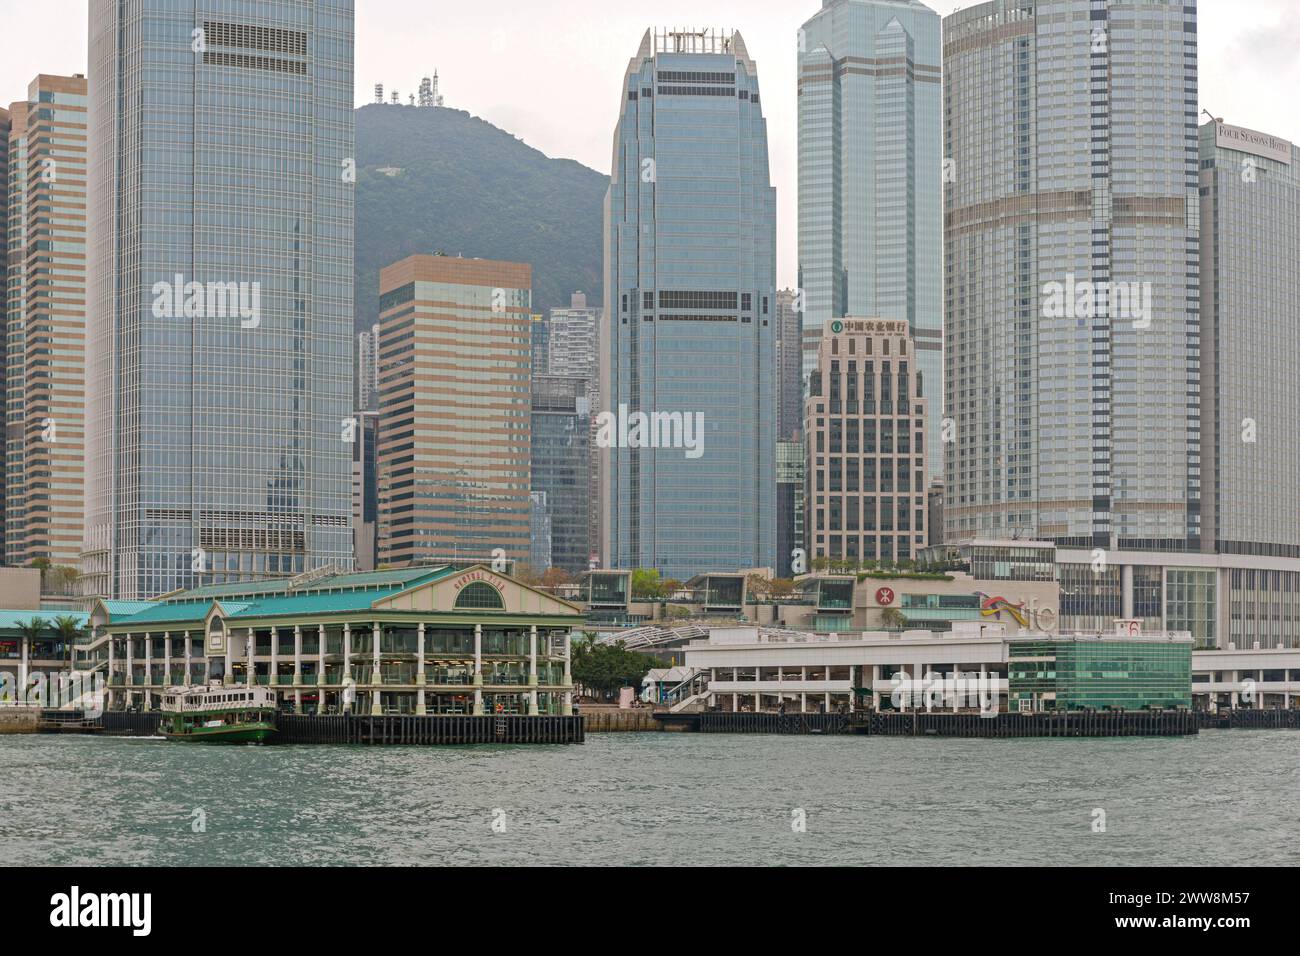 Hongkong, China - 23. April 2017: Central Pier Dock Building Building Structure und IFC Shopping Mall am Victoria Harbour Spring Day. Stockfoto